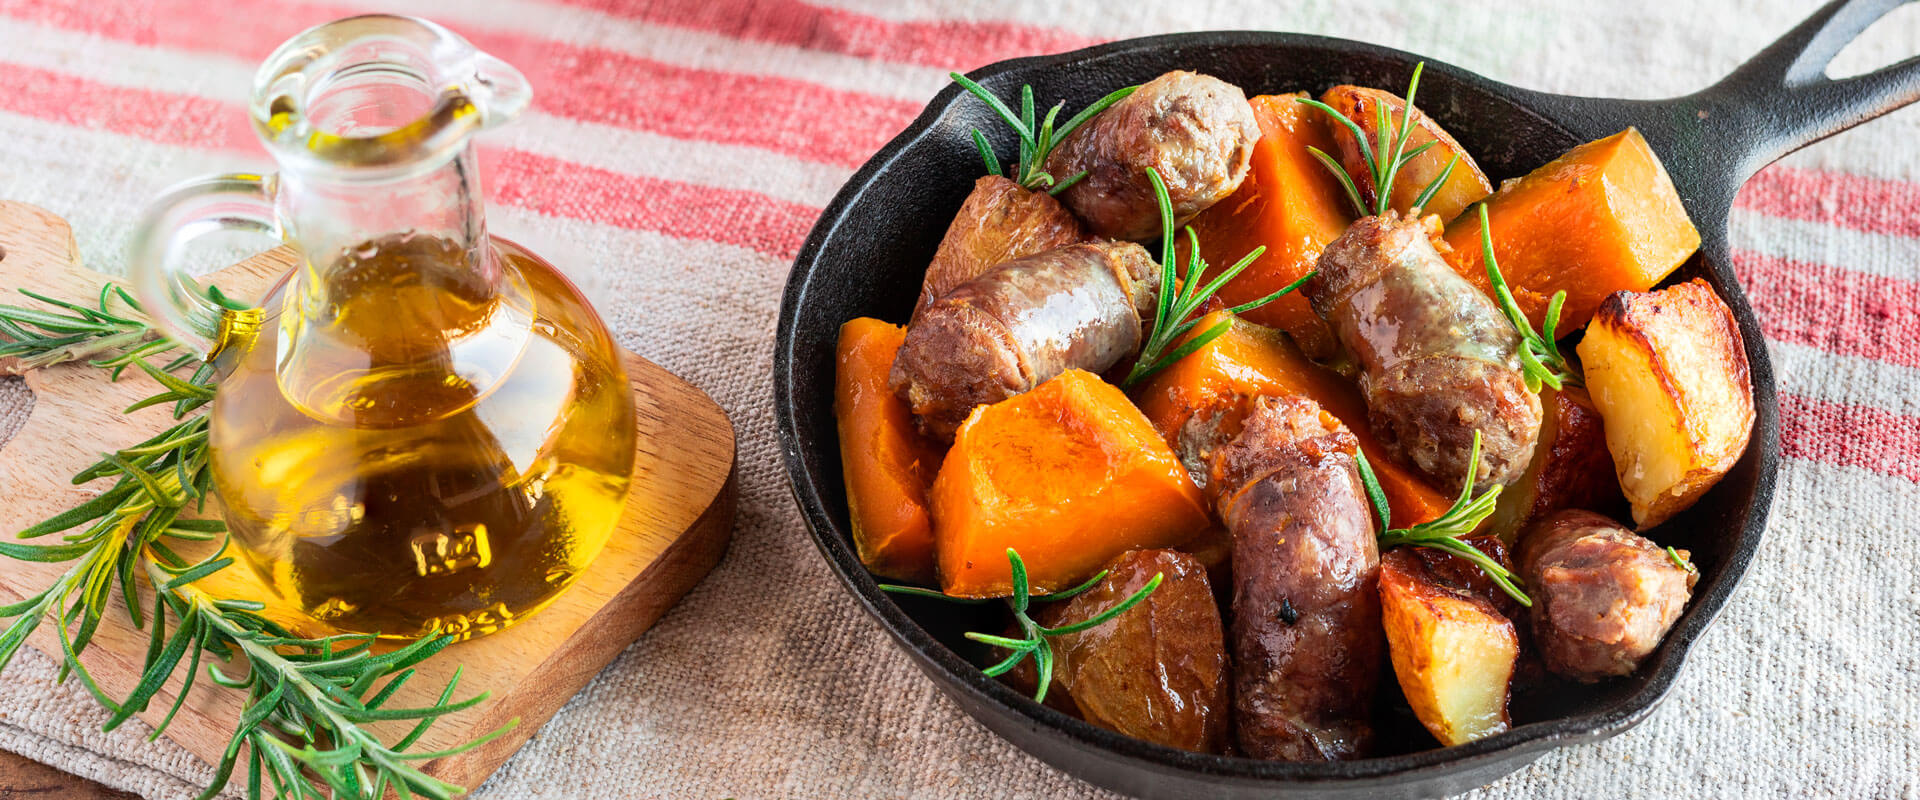 Roasted pumpkin with potatoes and sausage – Fratelli Carli